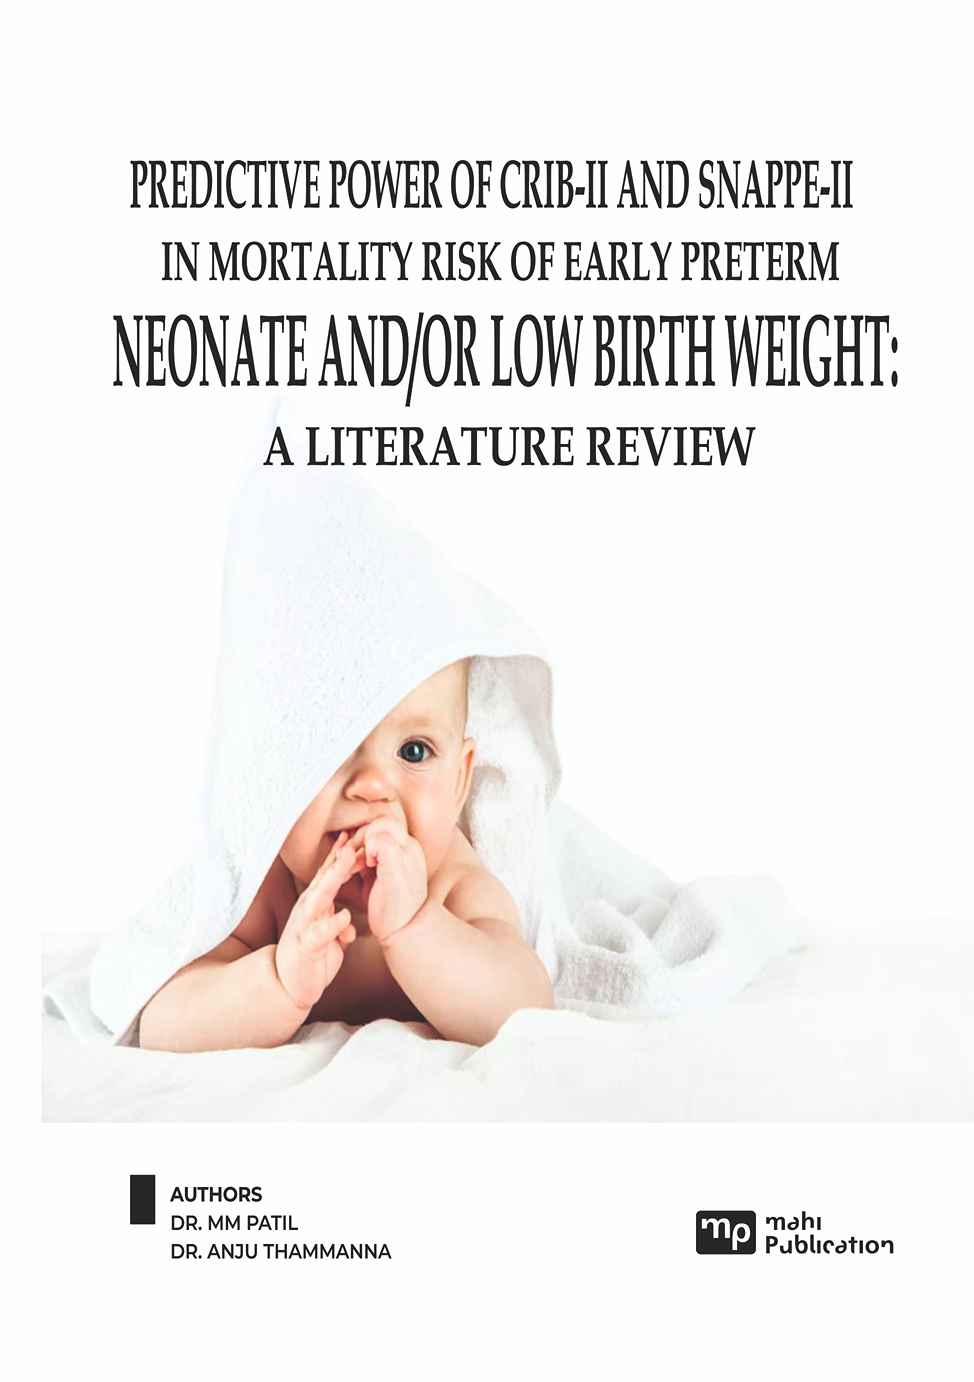 Predictive Power Of Crib-Ii And Snappe-Ii In Mortality Risk Of Early Preterm Neonate And/Or Low Birth Weight: A Literature Review